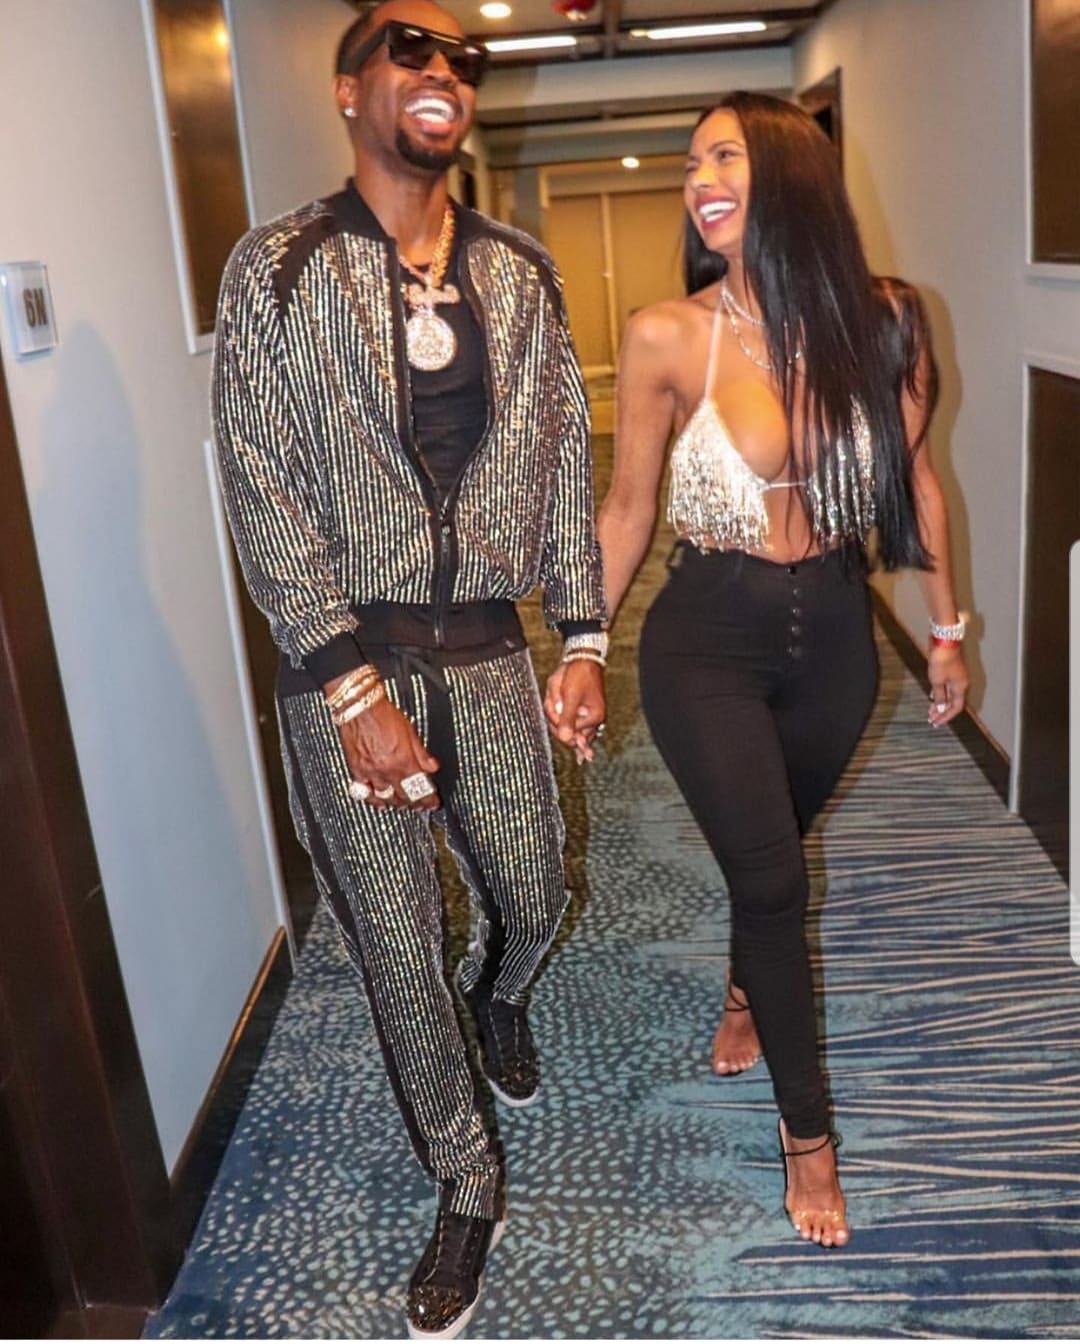 Erica Mena Is Grateful To Safaree - Here's Her Emotional Message And Gorgeous Photo